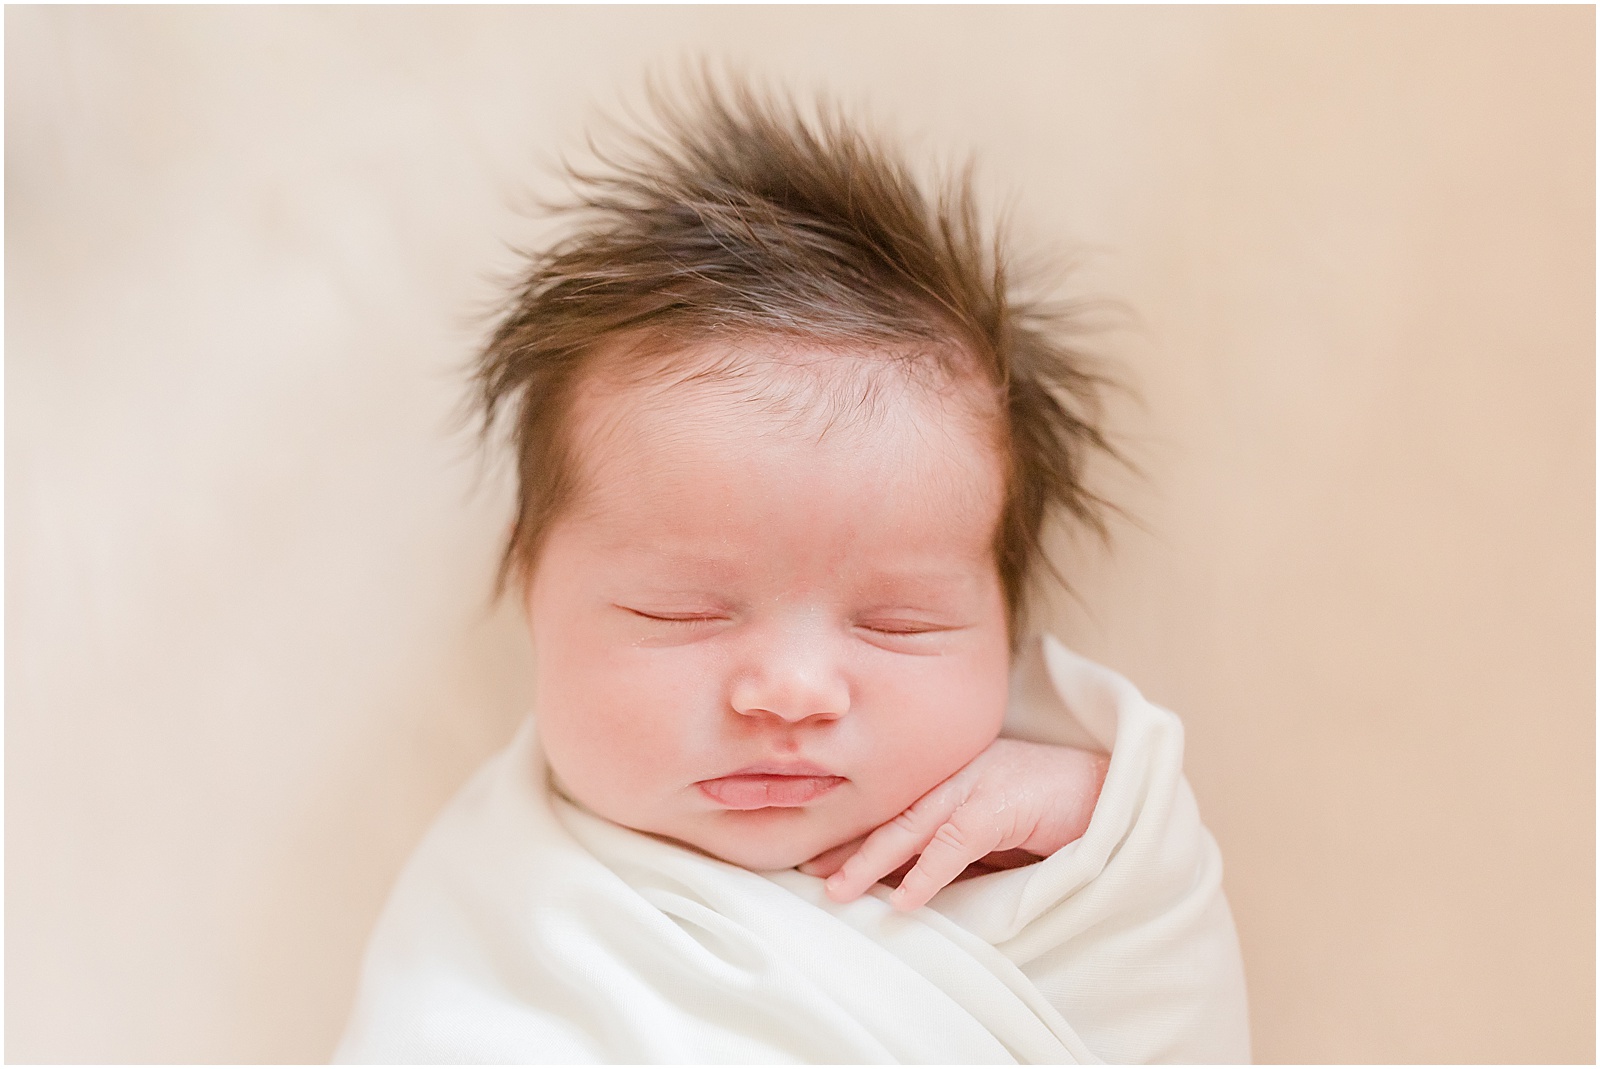 Portrait of a newborn baby girl with thick dark hair sticking up by Greenville photographer Molly Hensley
